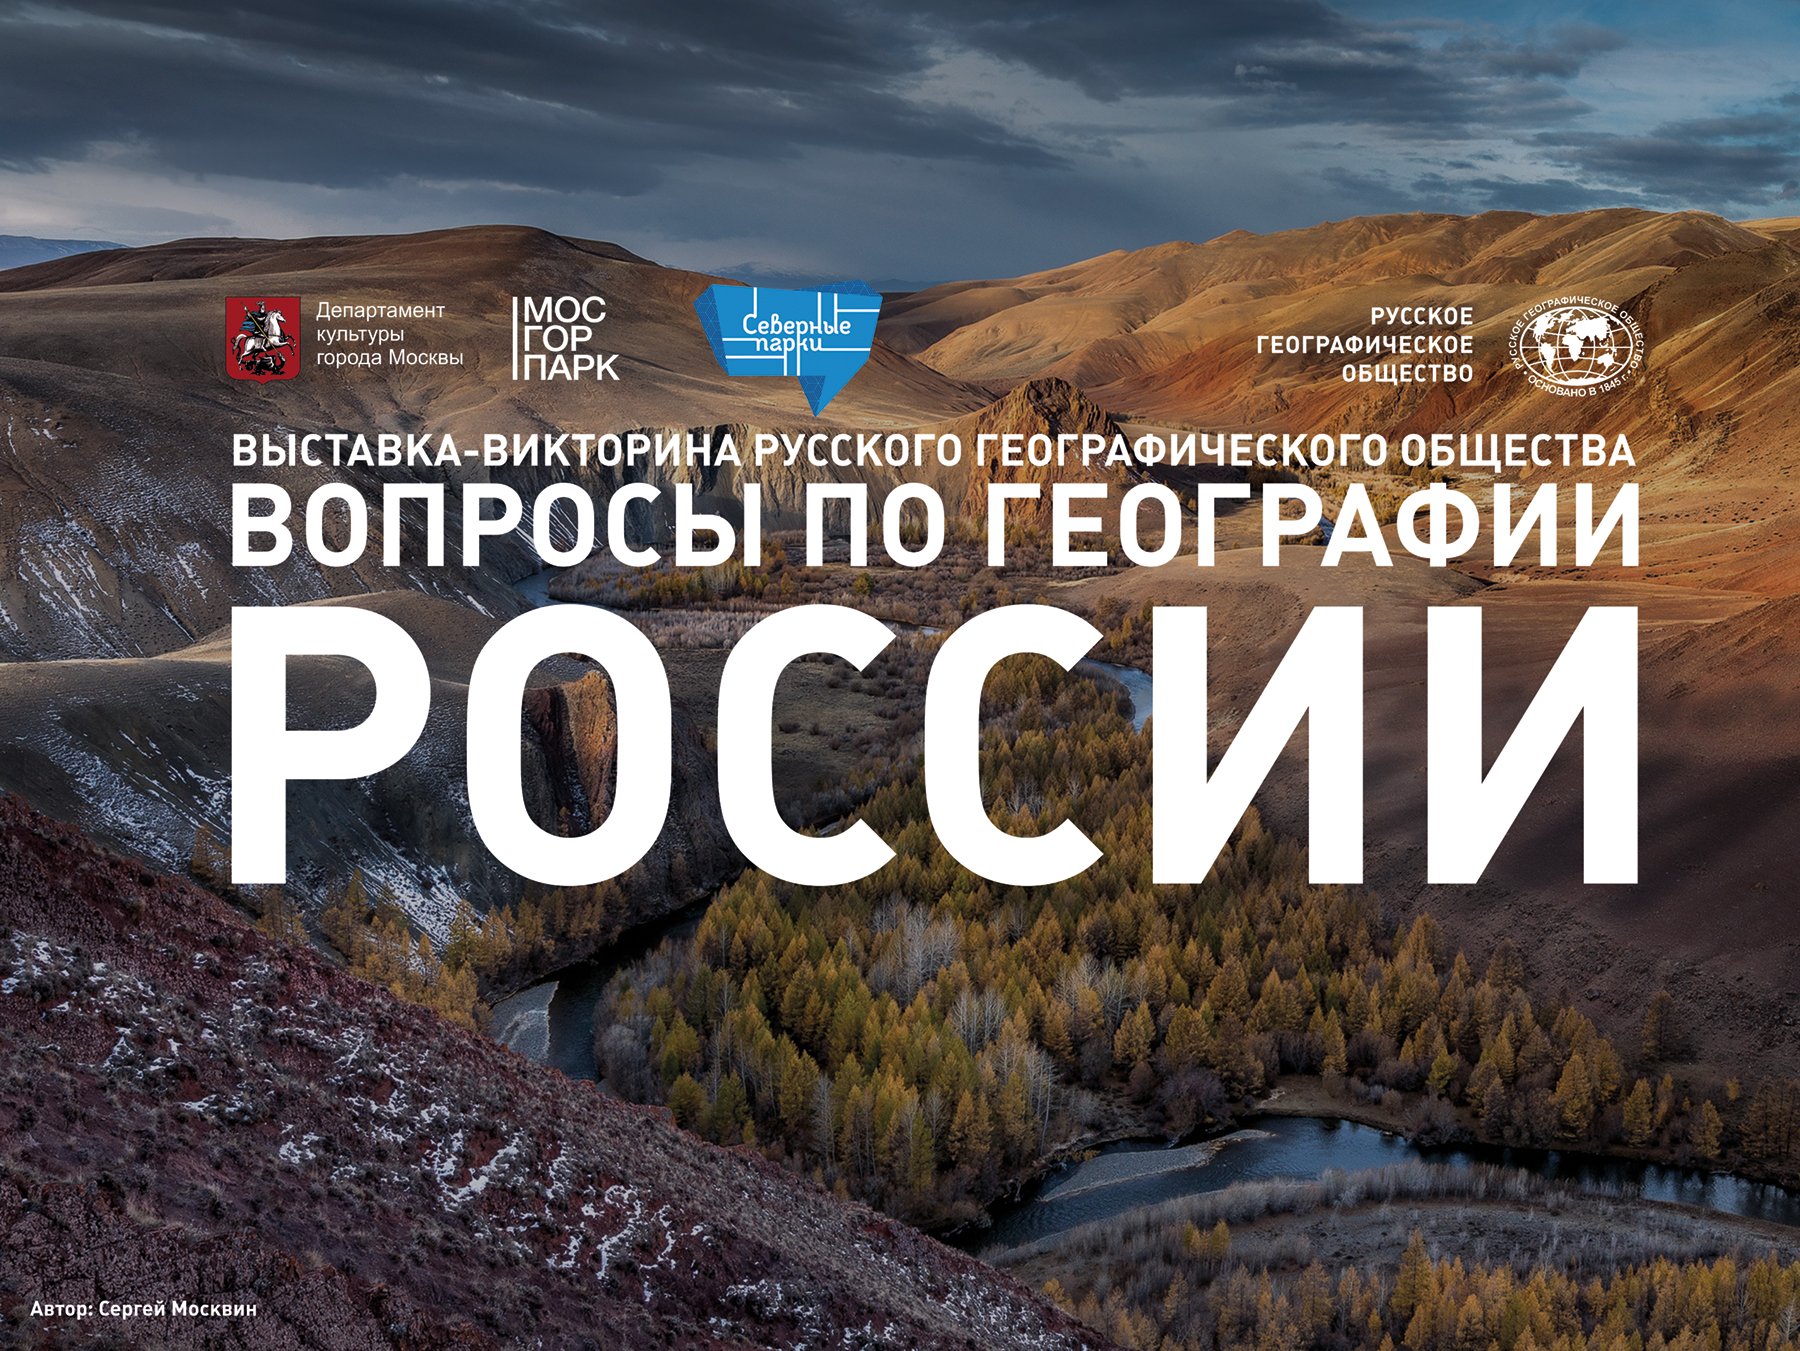 The exhibition-quiz of the Russian Geographical Society will be held in the Moscow park “Northern Tushino”